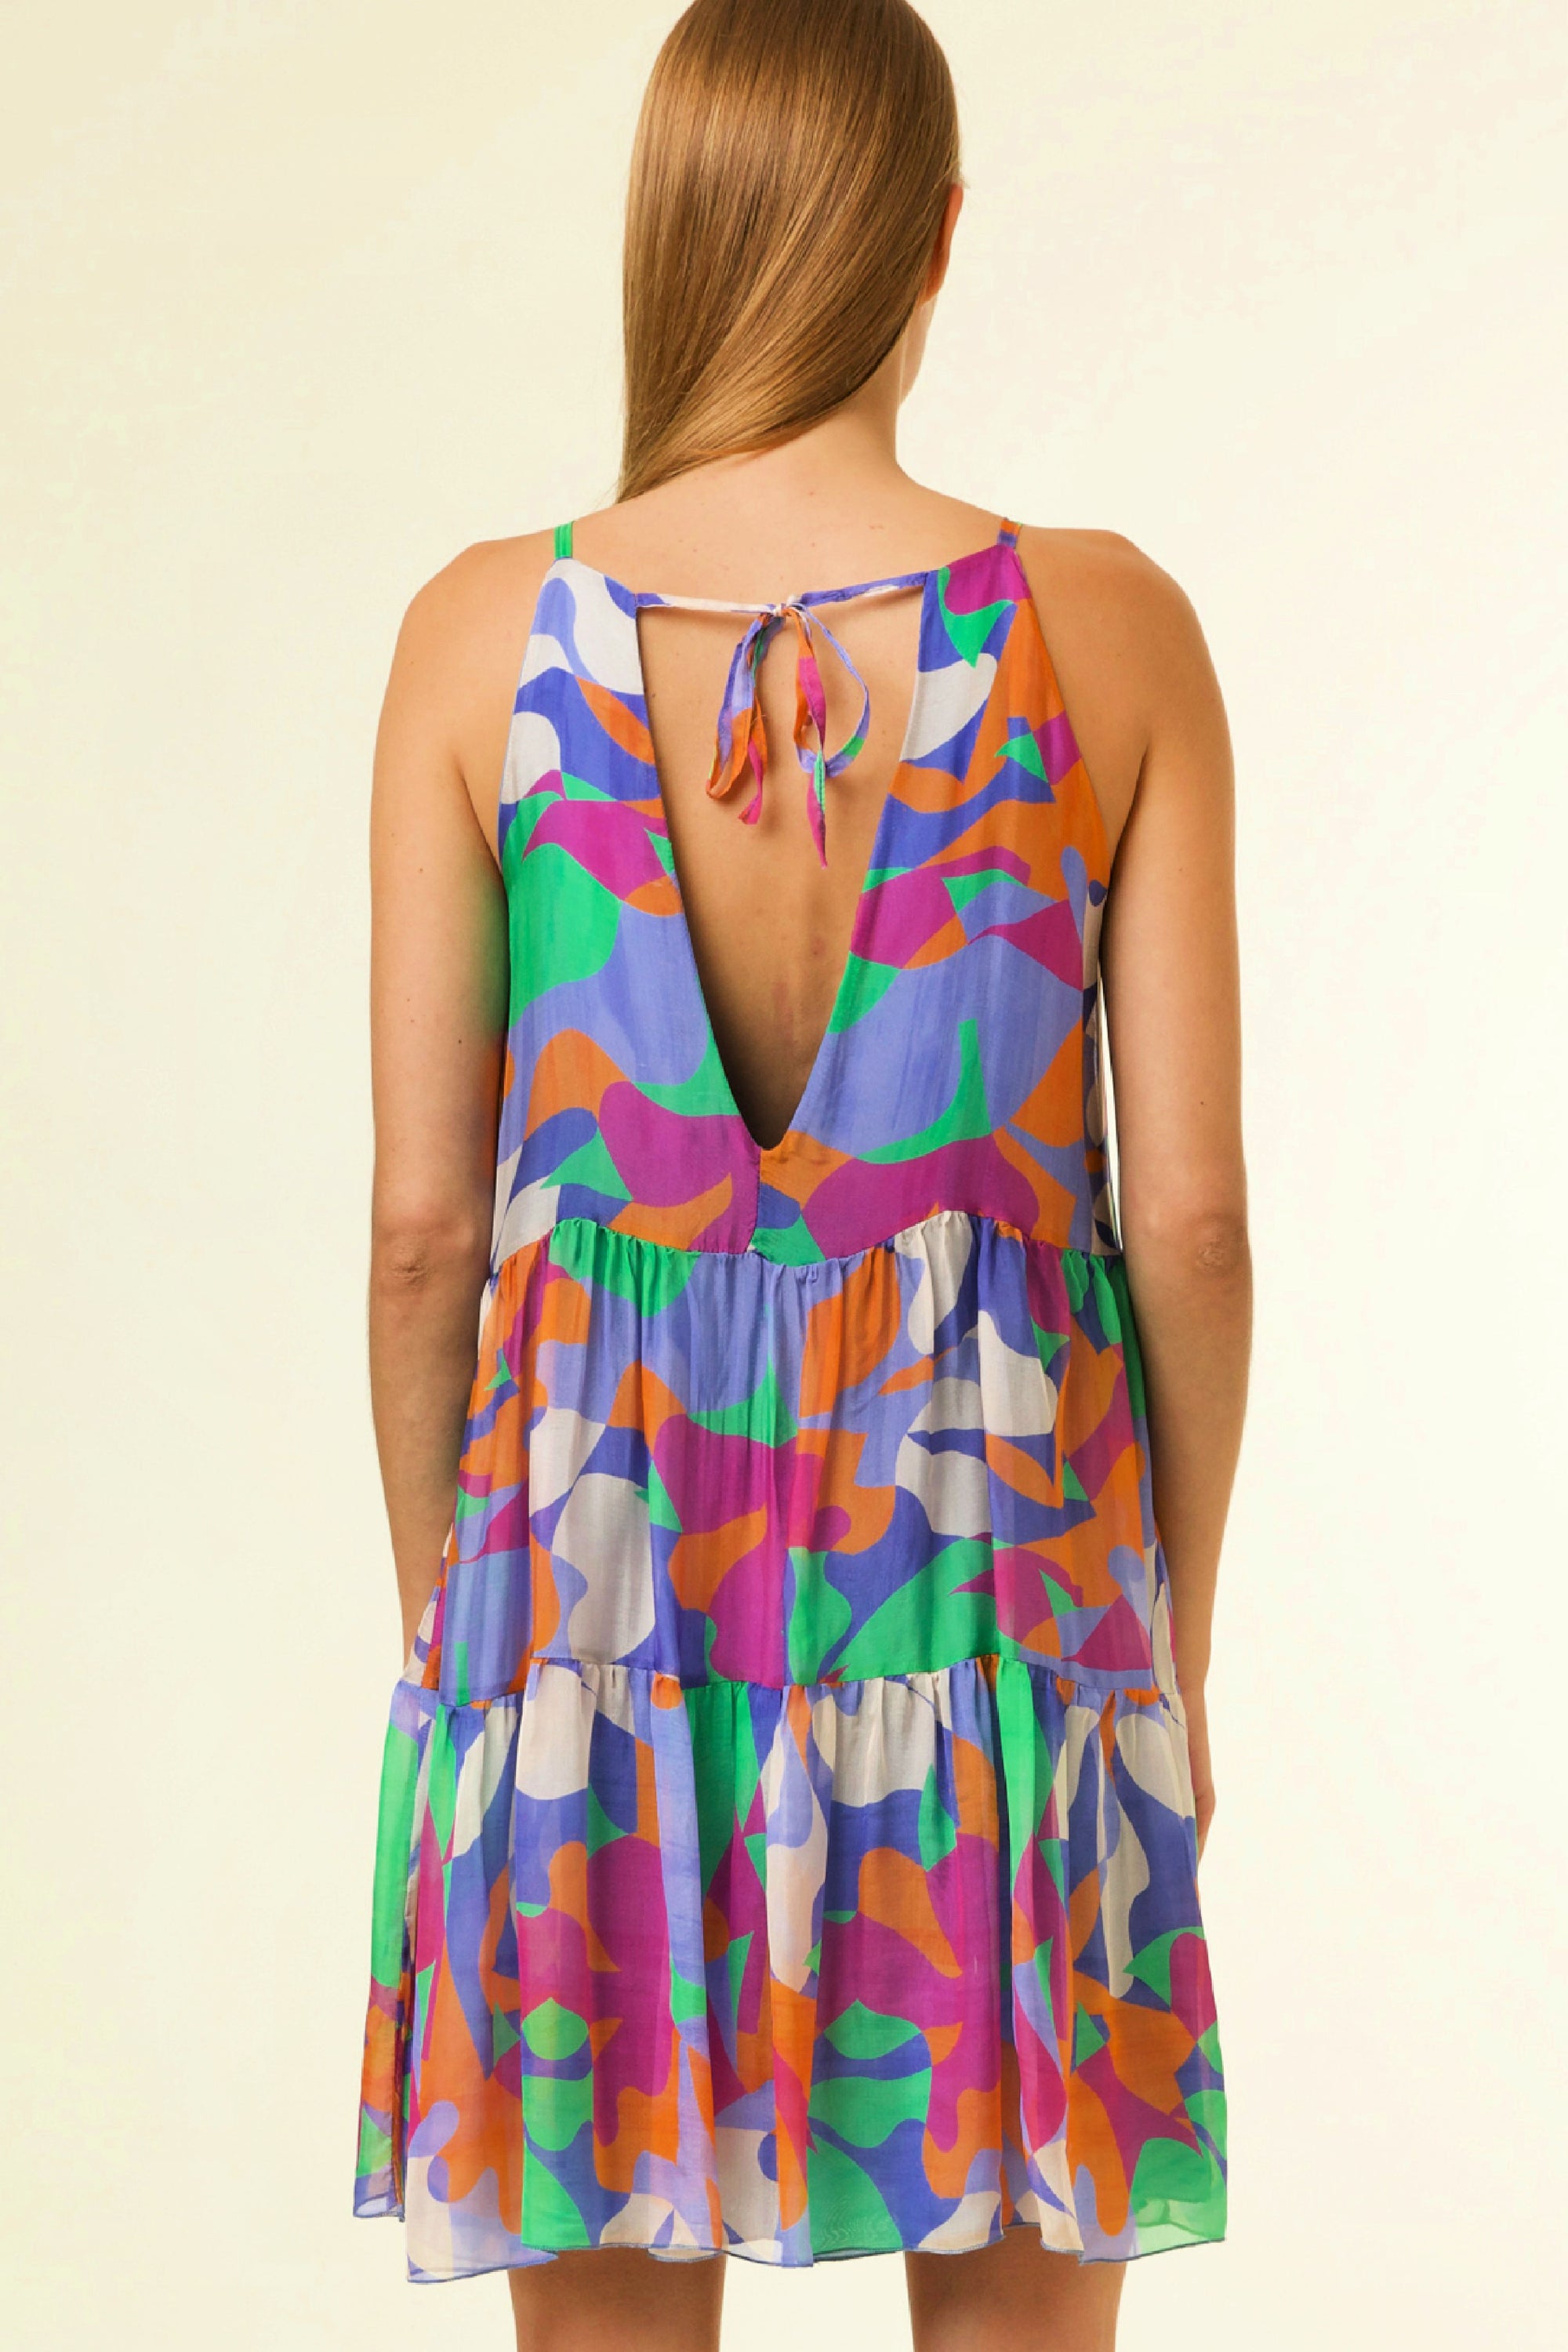 The Aneth Abstract Mini Dress by FRNCH